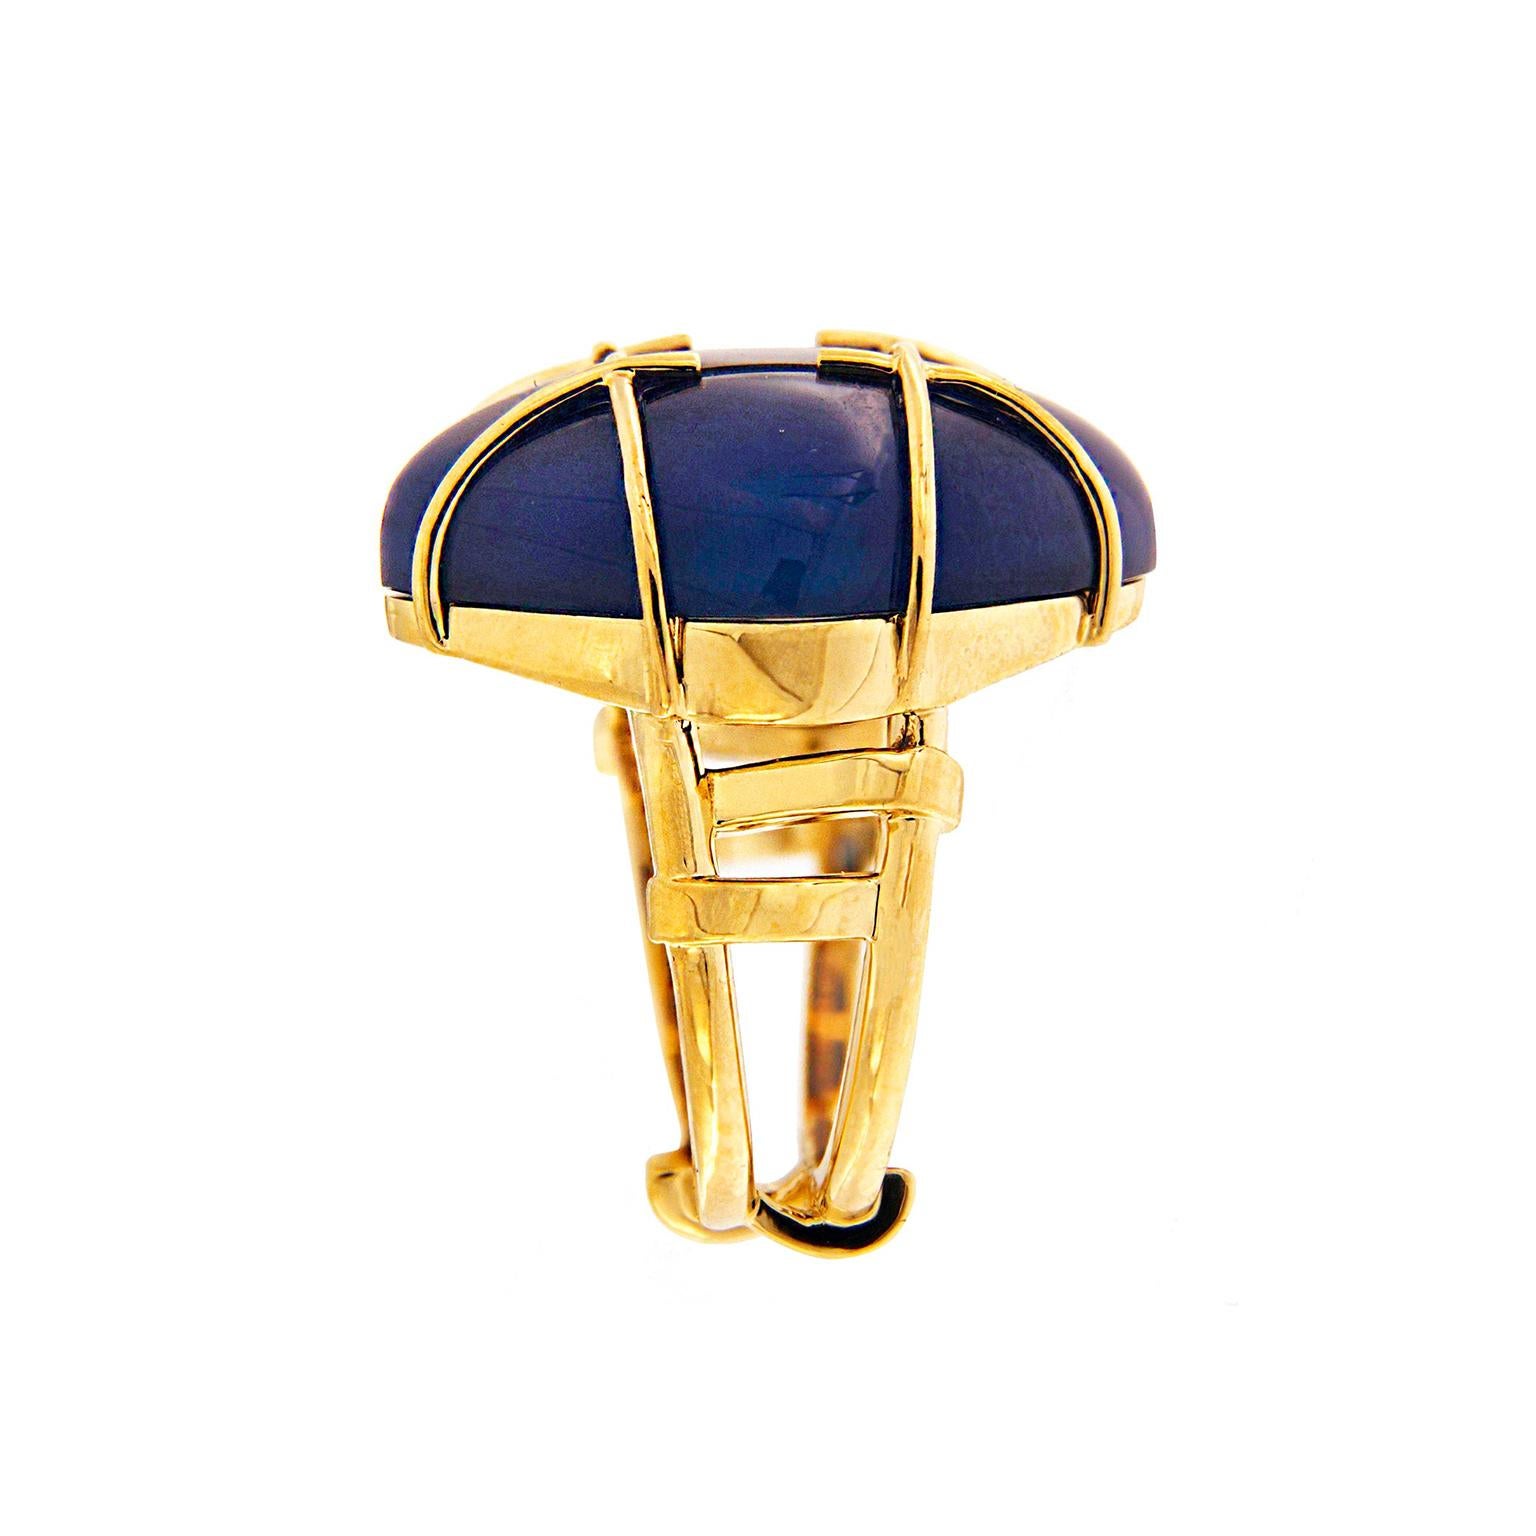 Blue agate is the lucent peak of this ring. Carved into a square cabochon of 31.5 carats, the chalcedony is rotated on its side to form a rhombus. Sleek 18k yellow bars wrap over the gem in a crisscross pattern, for added color and contrast. The